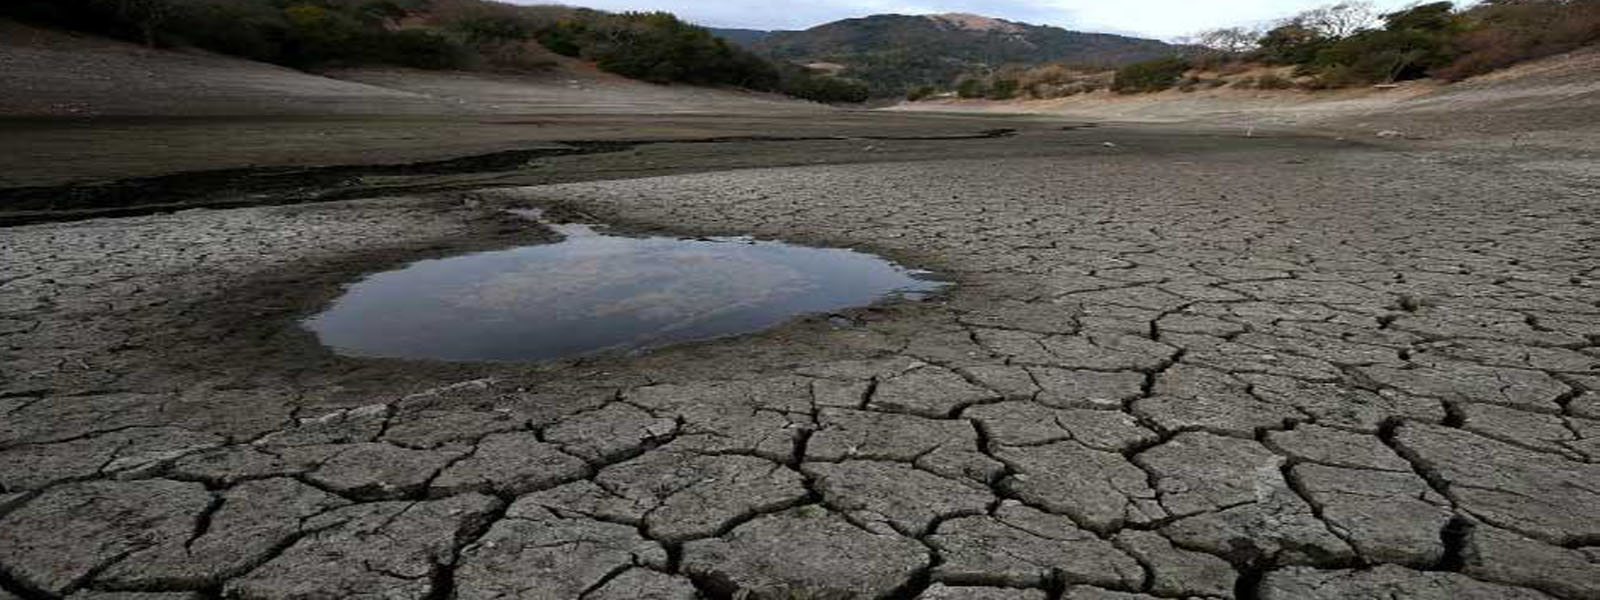 Drought, harsh conditions affect 300,000